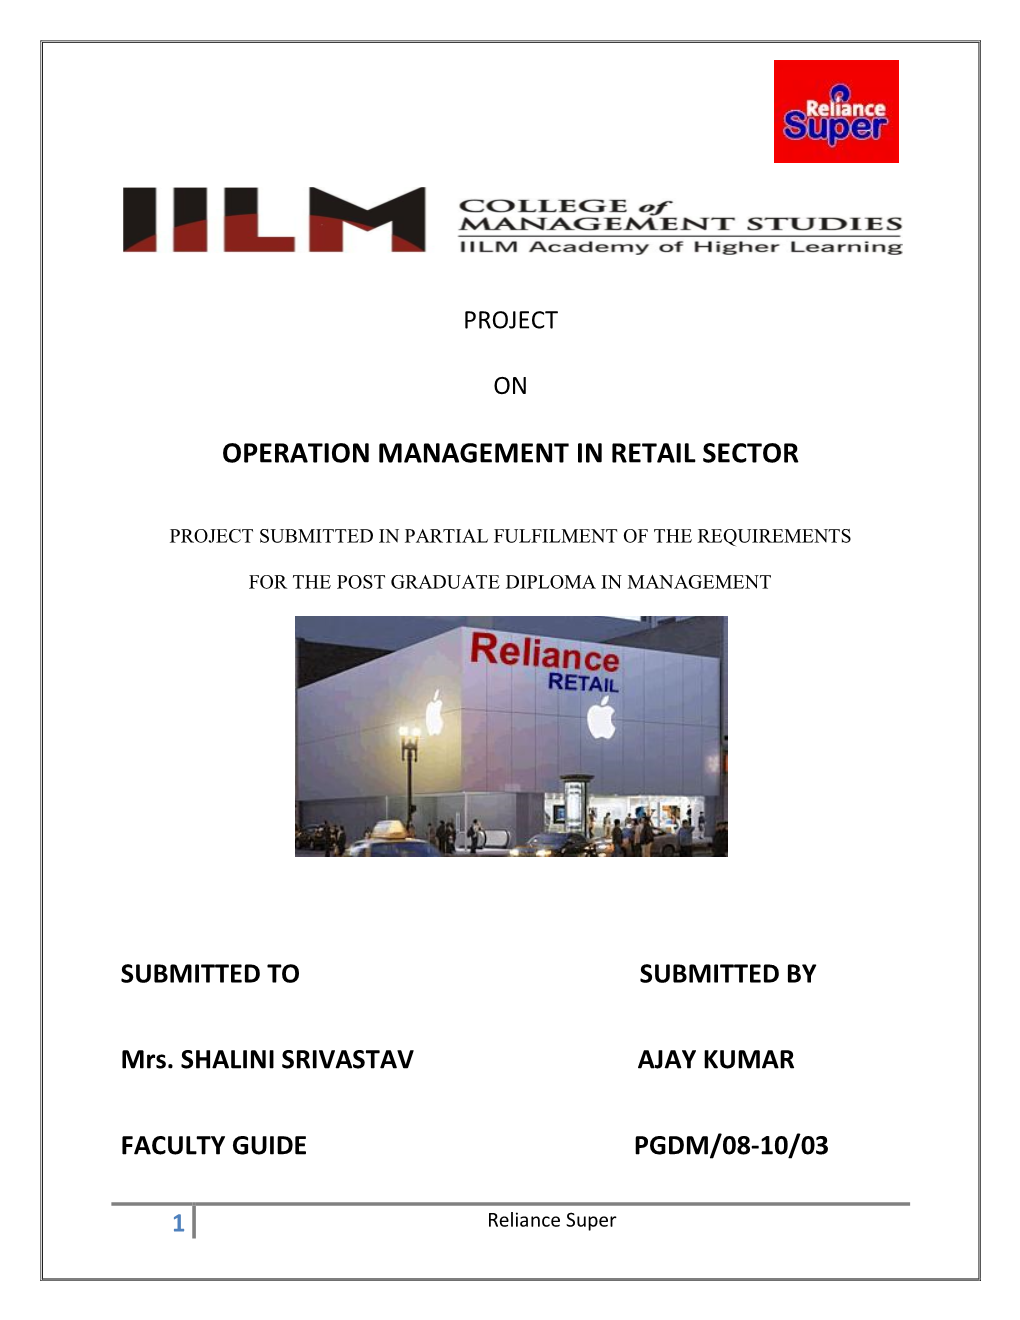 Operation Management in Retail Sector